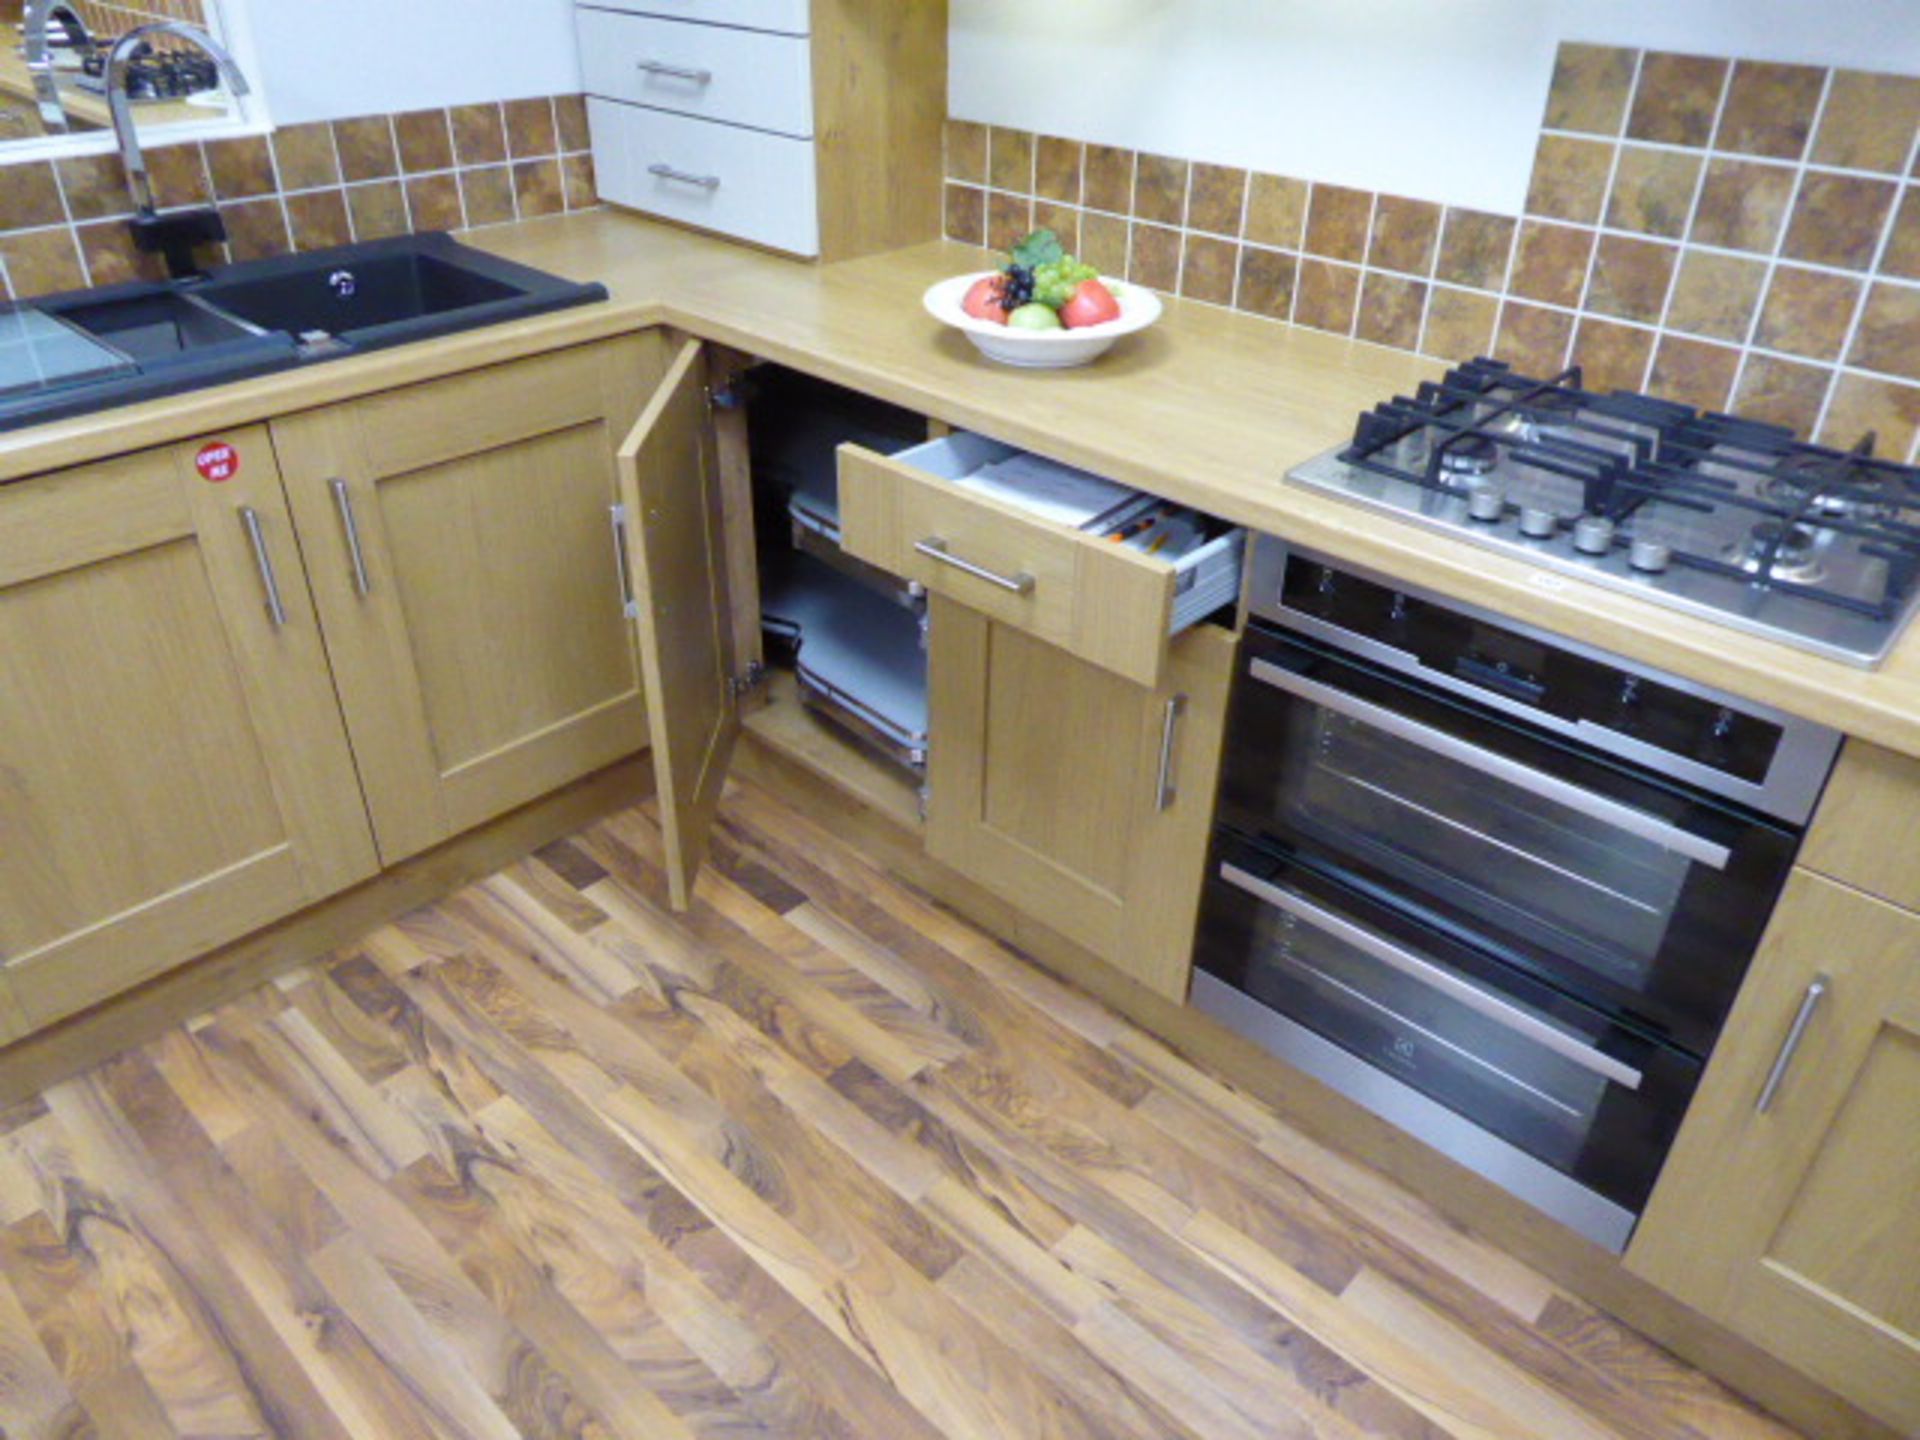 Milbourne oak and almond kitchen with oak effect laminate worktops. Max measurement is 390cm x - Image 8 of 13